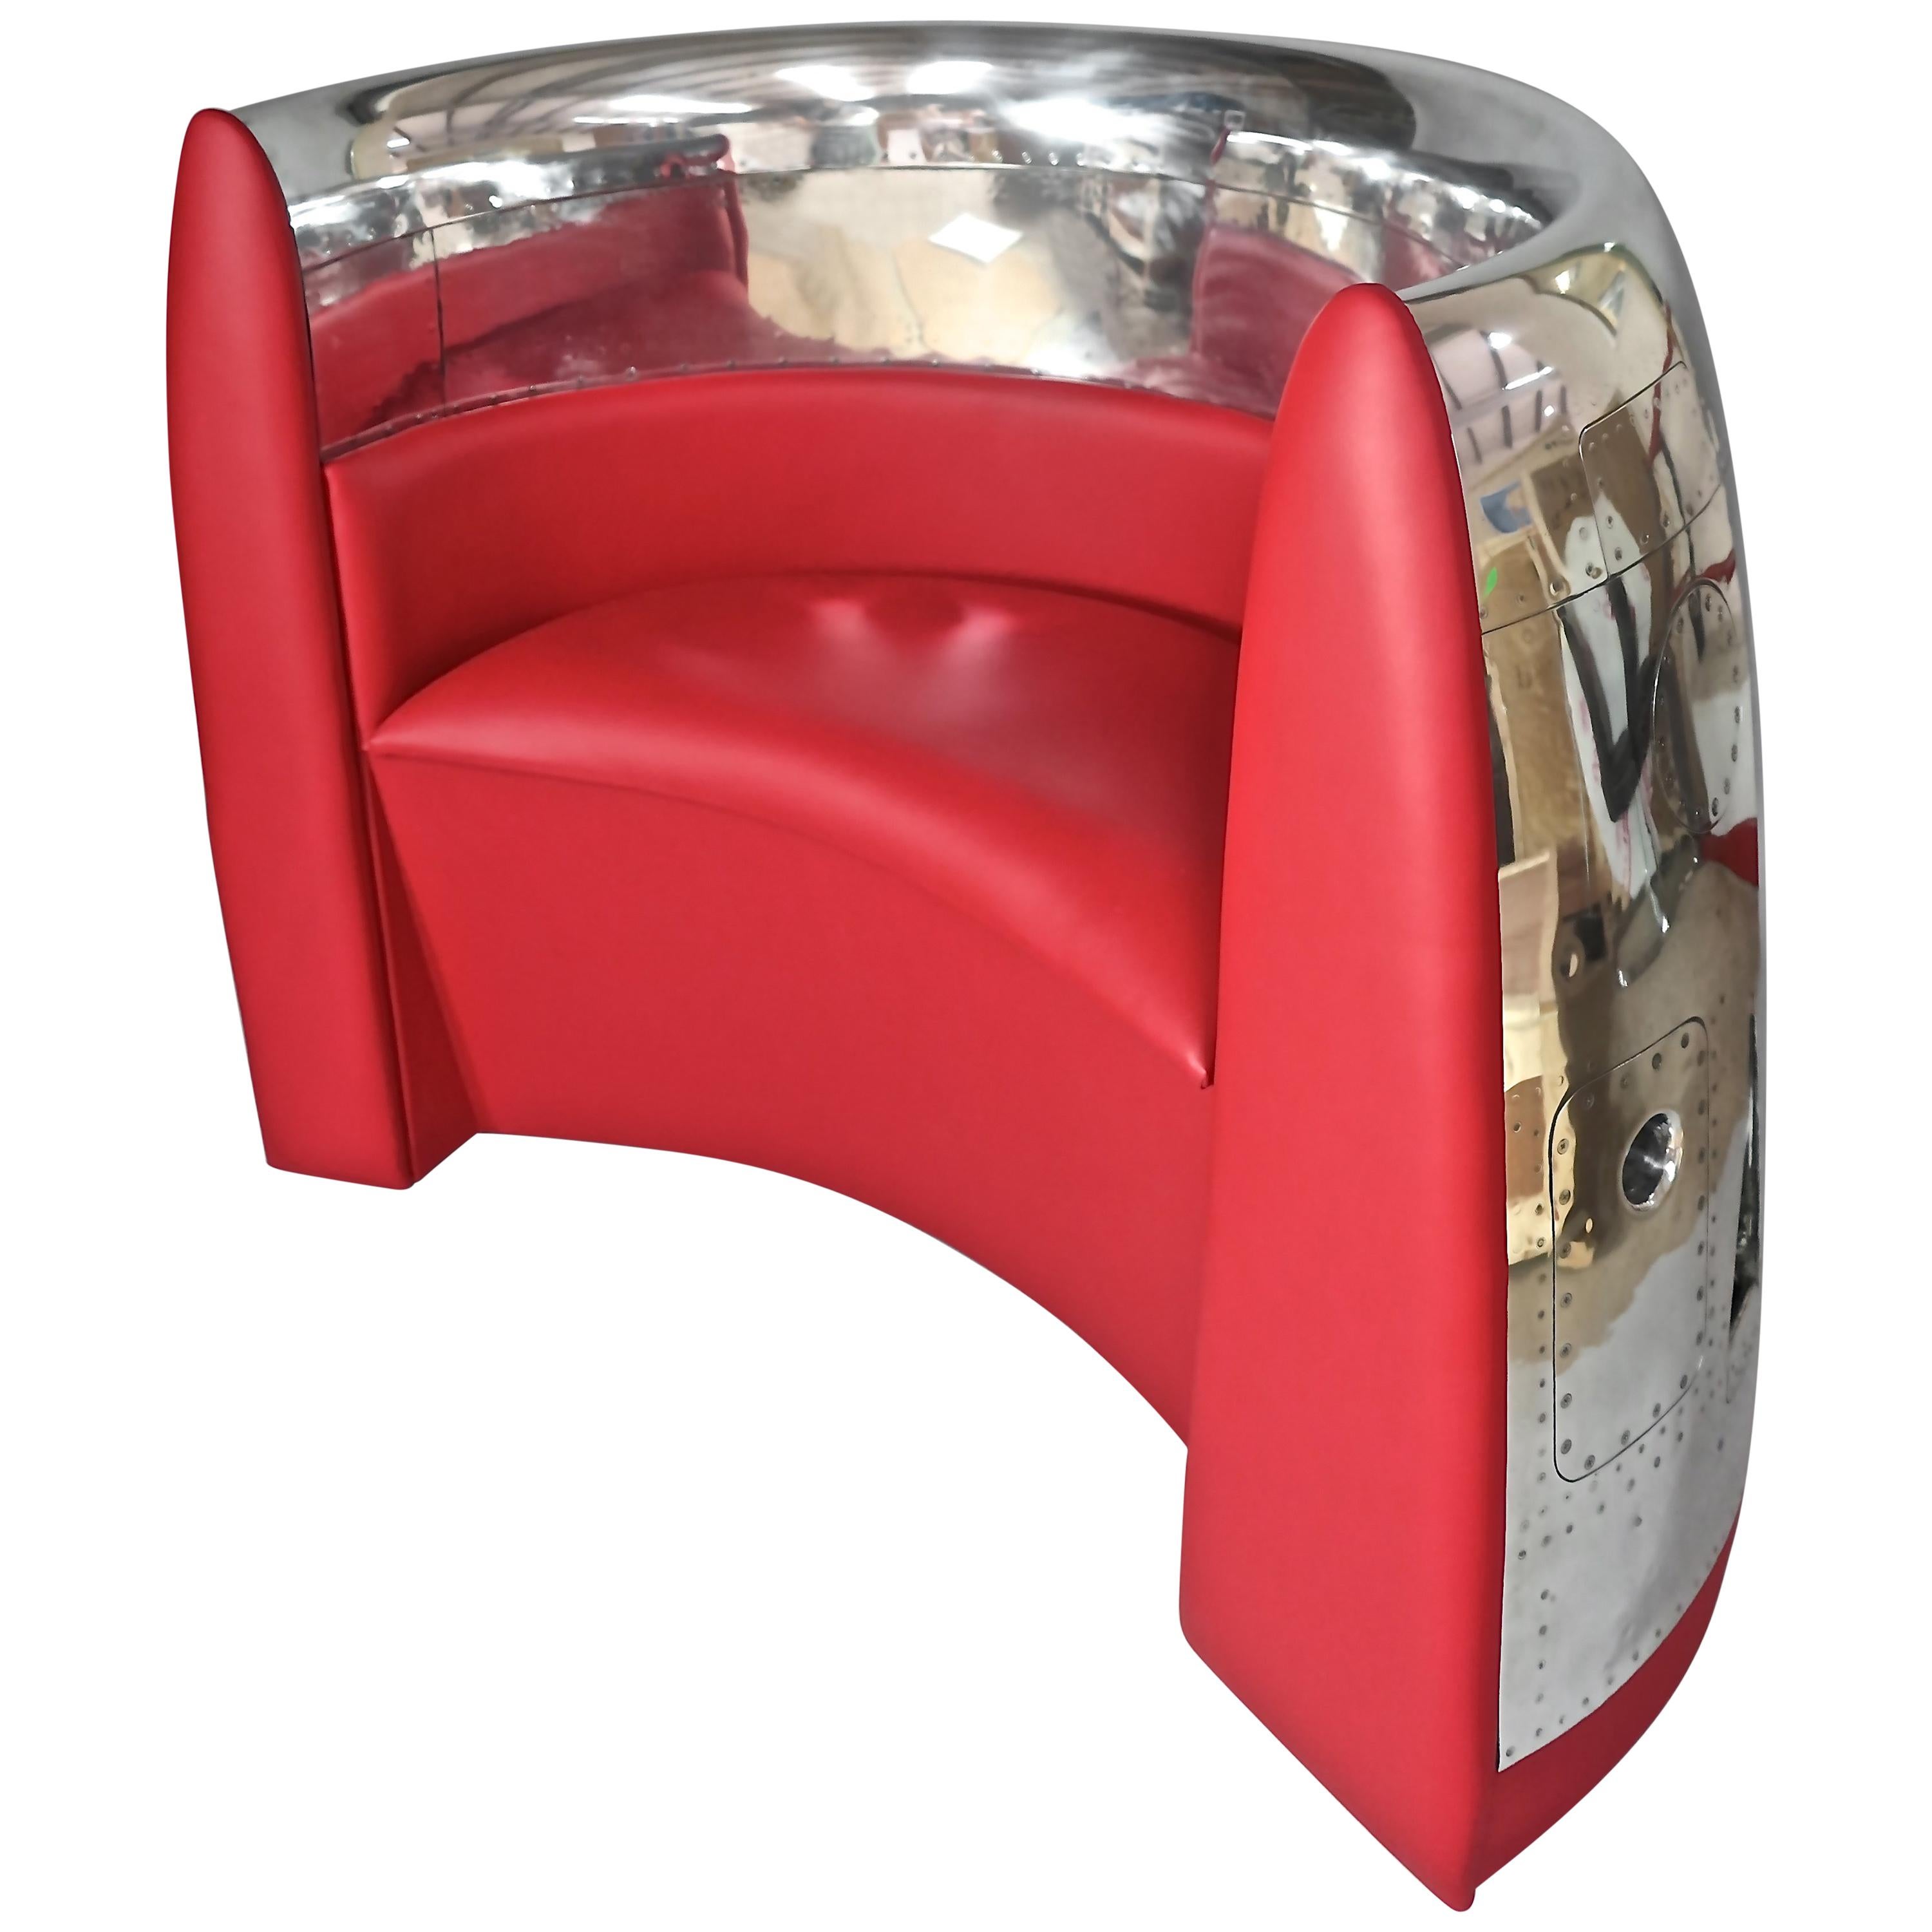 Red Jet Cowling Aircraft Chair For Sale